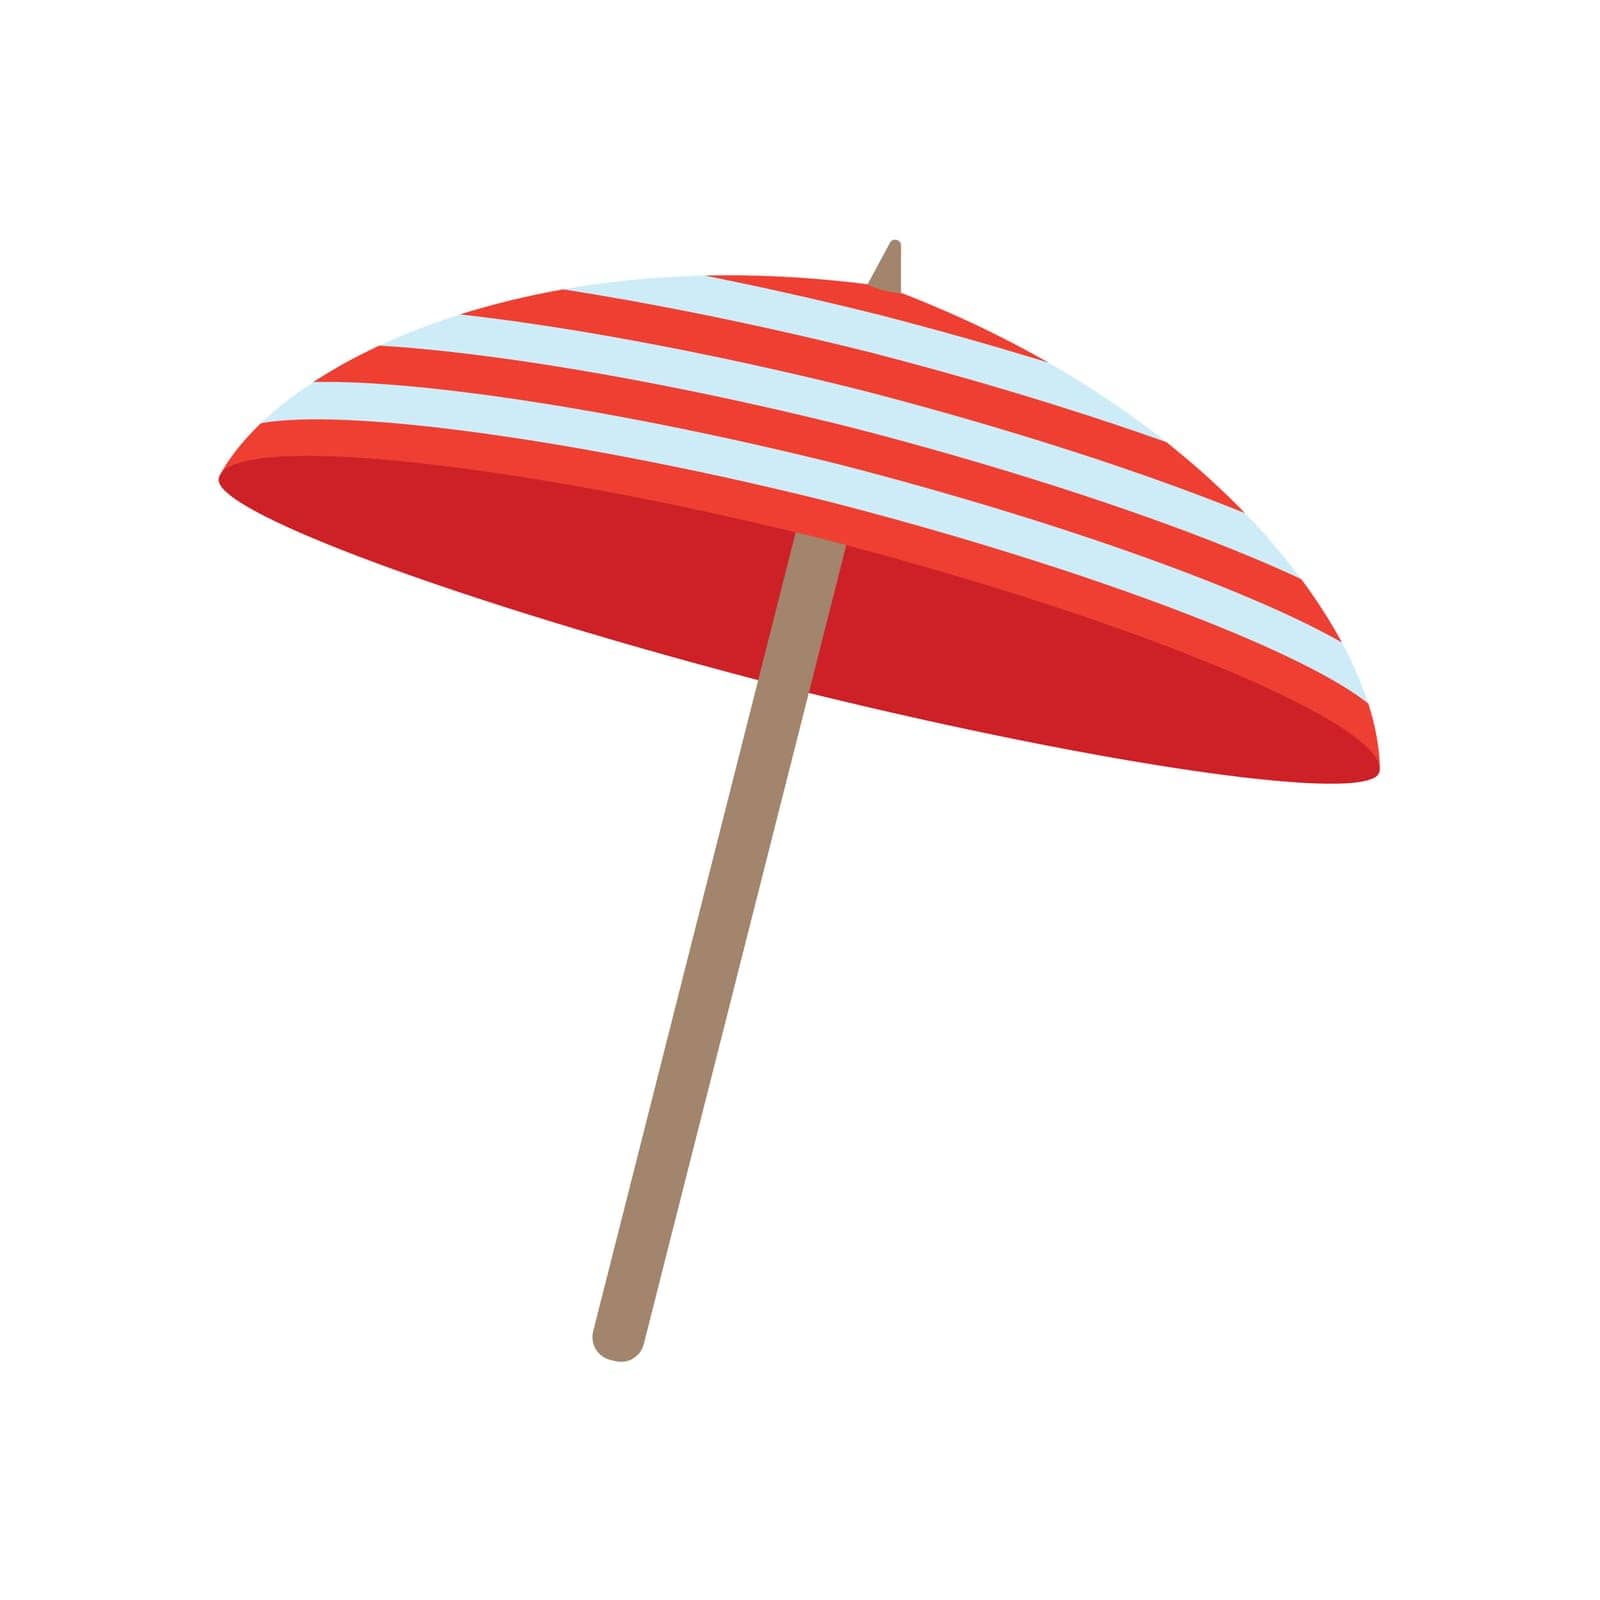 Parasol icon vector image. Suitable for mobile application web application and print media.